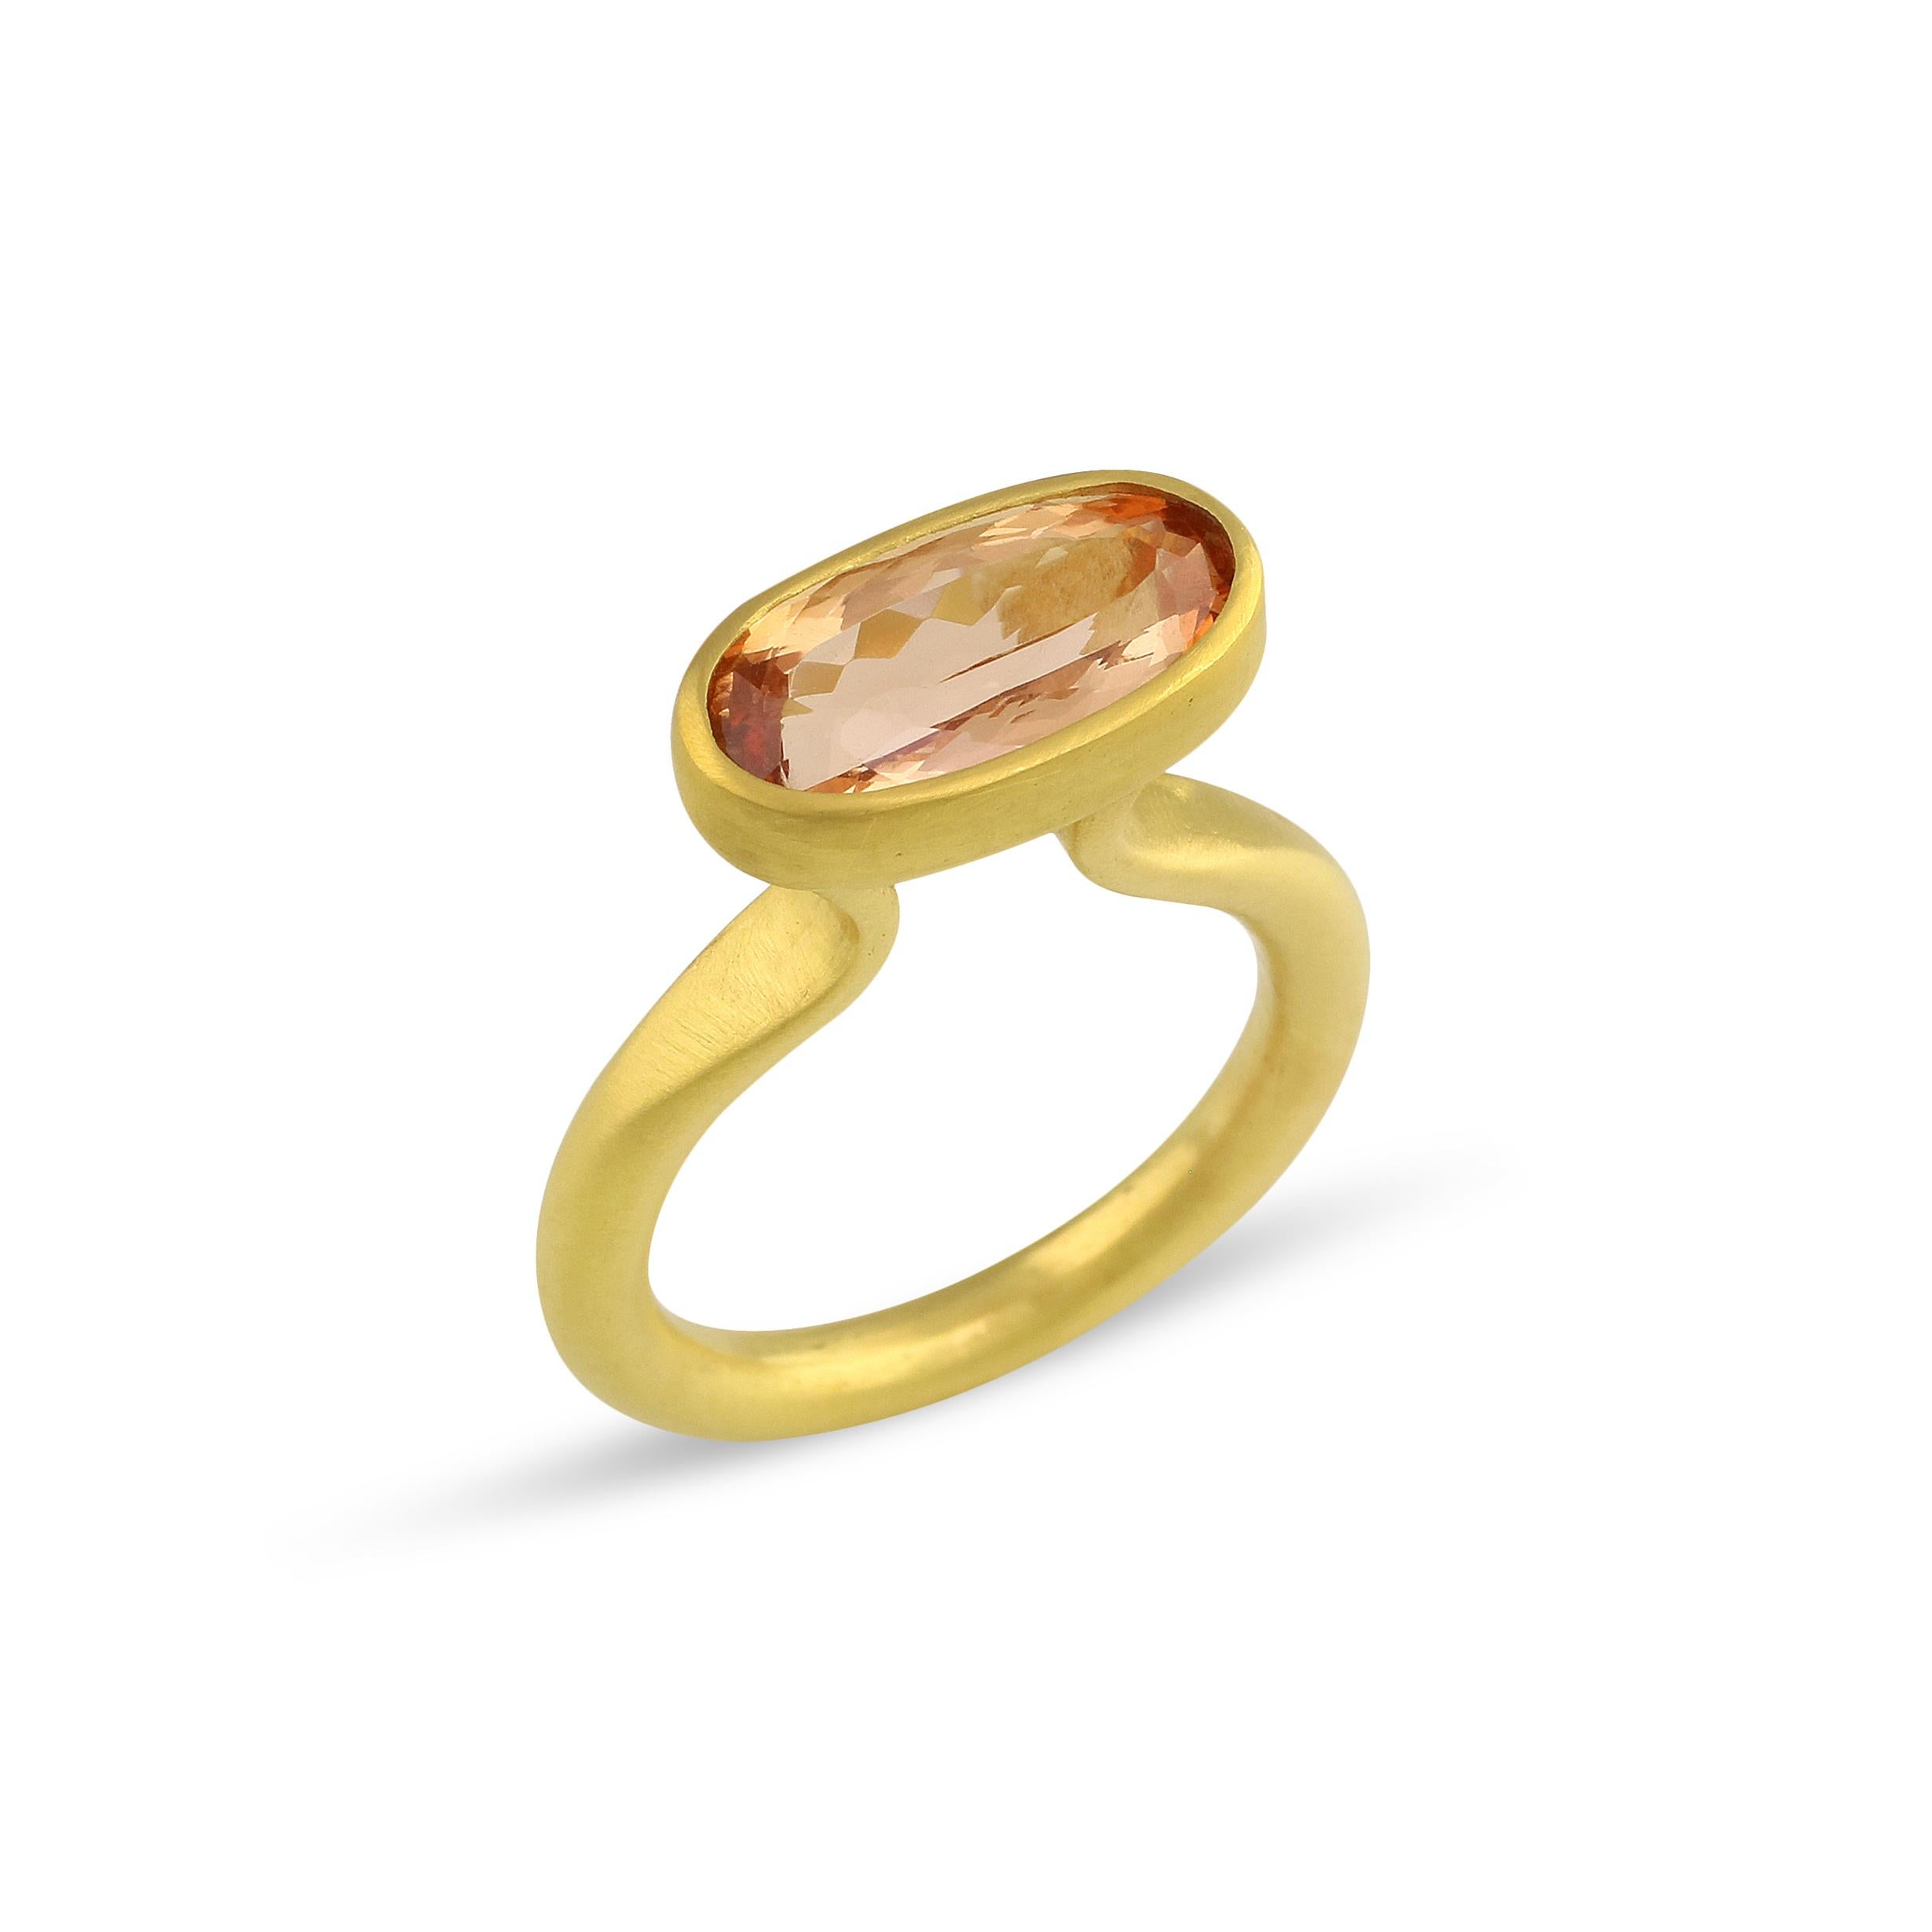 Artisan PHILIPPE SPENCER 4.2 Ct. Imperial Topaz in 22K and 20K Gold Statement Ring For Sale